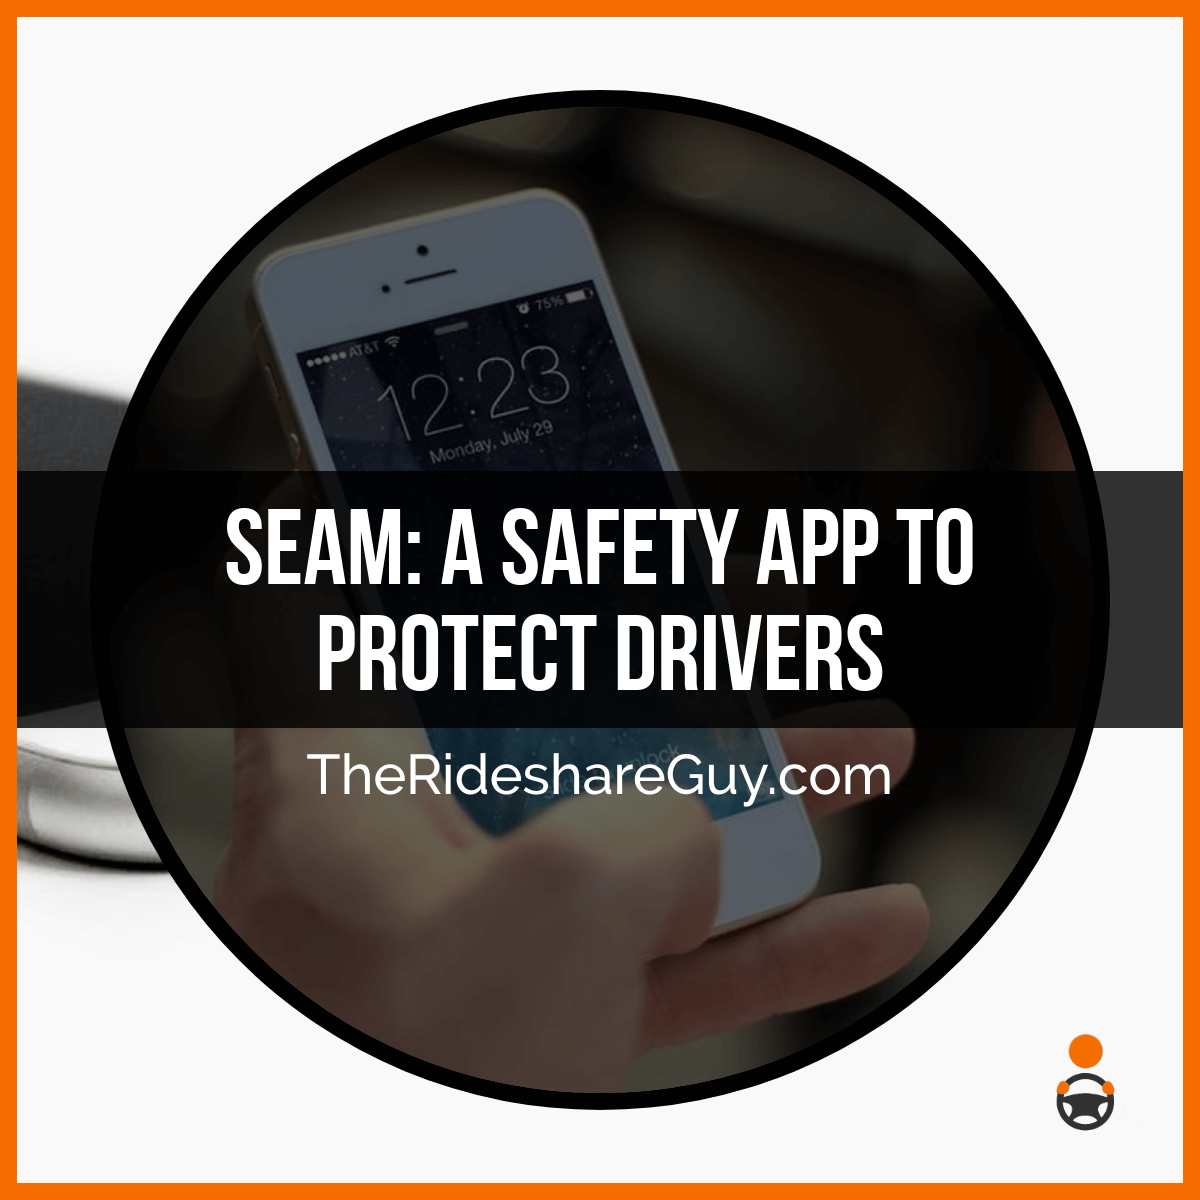 Seam: A Safety App To Protect Drivers